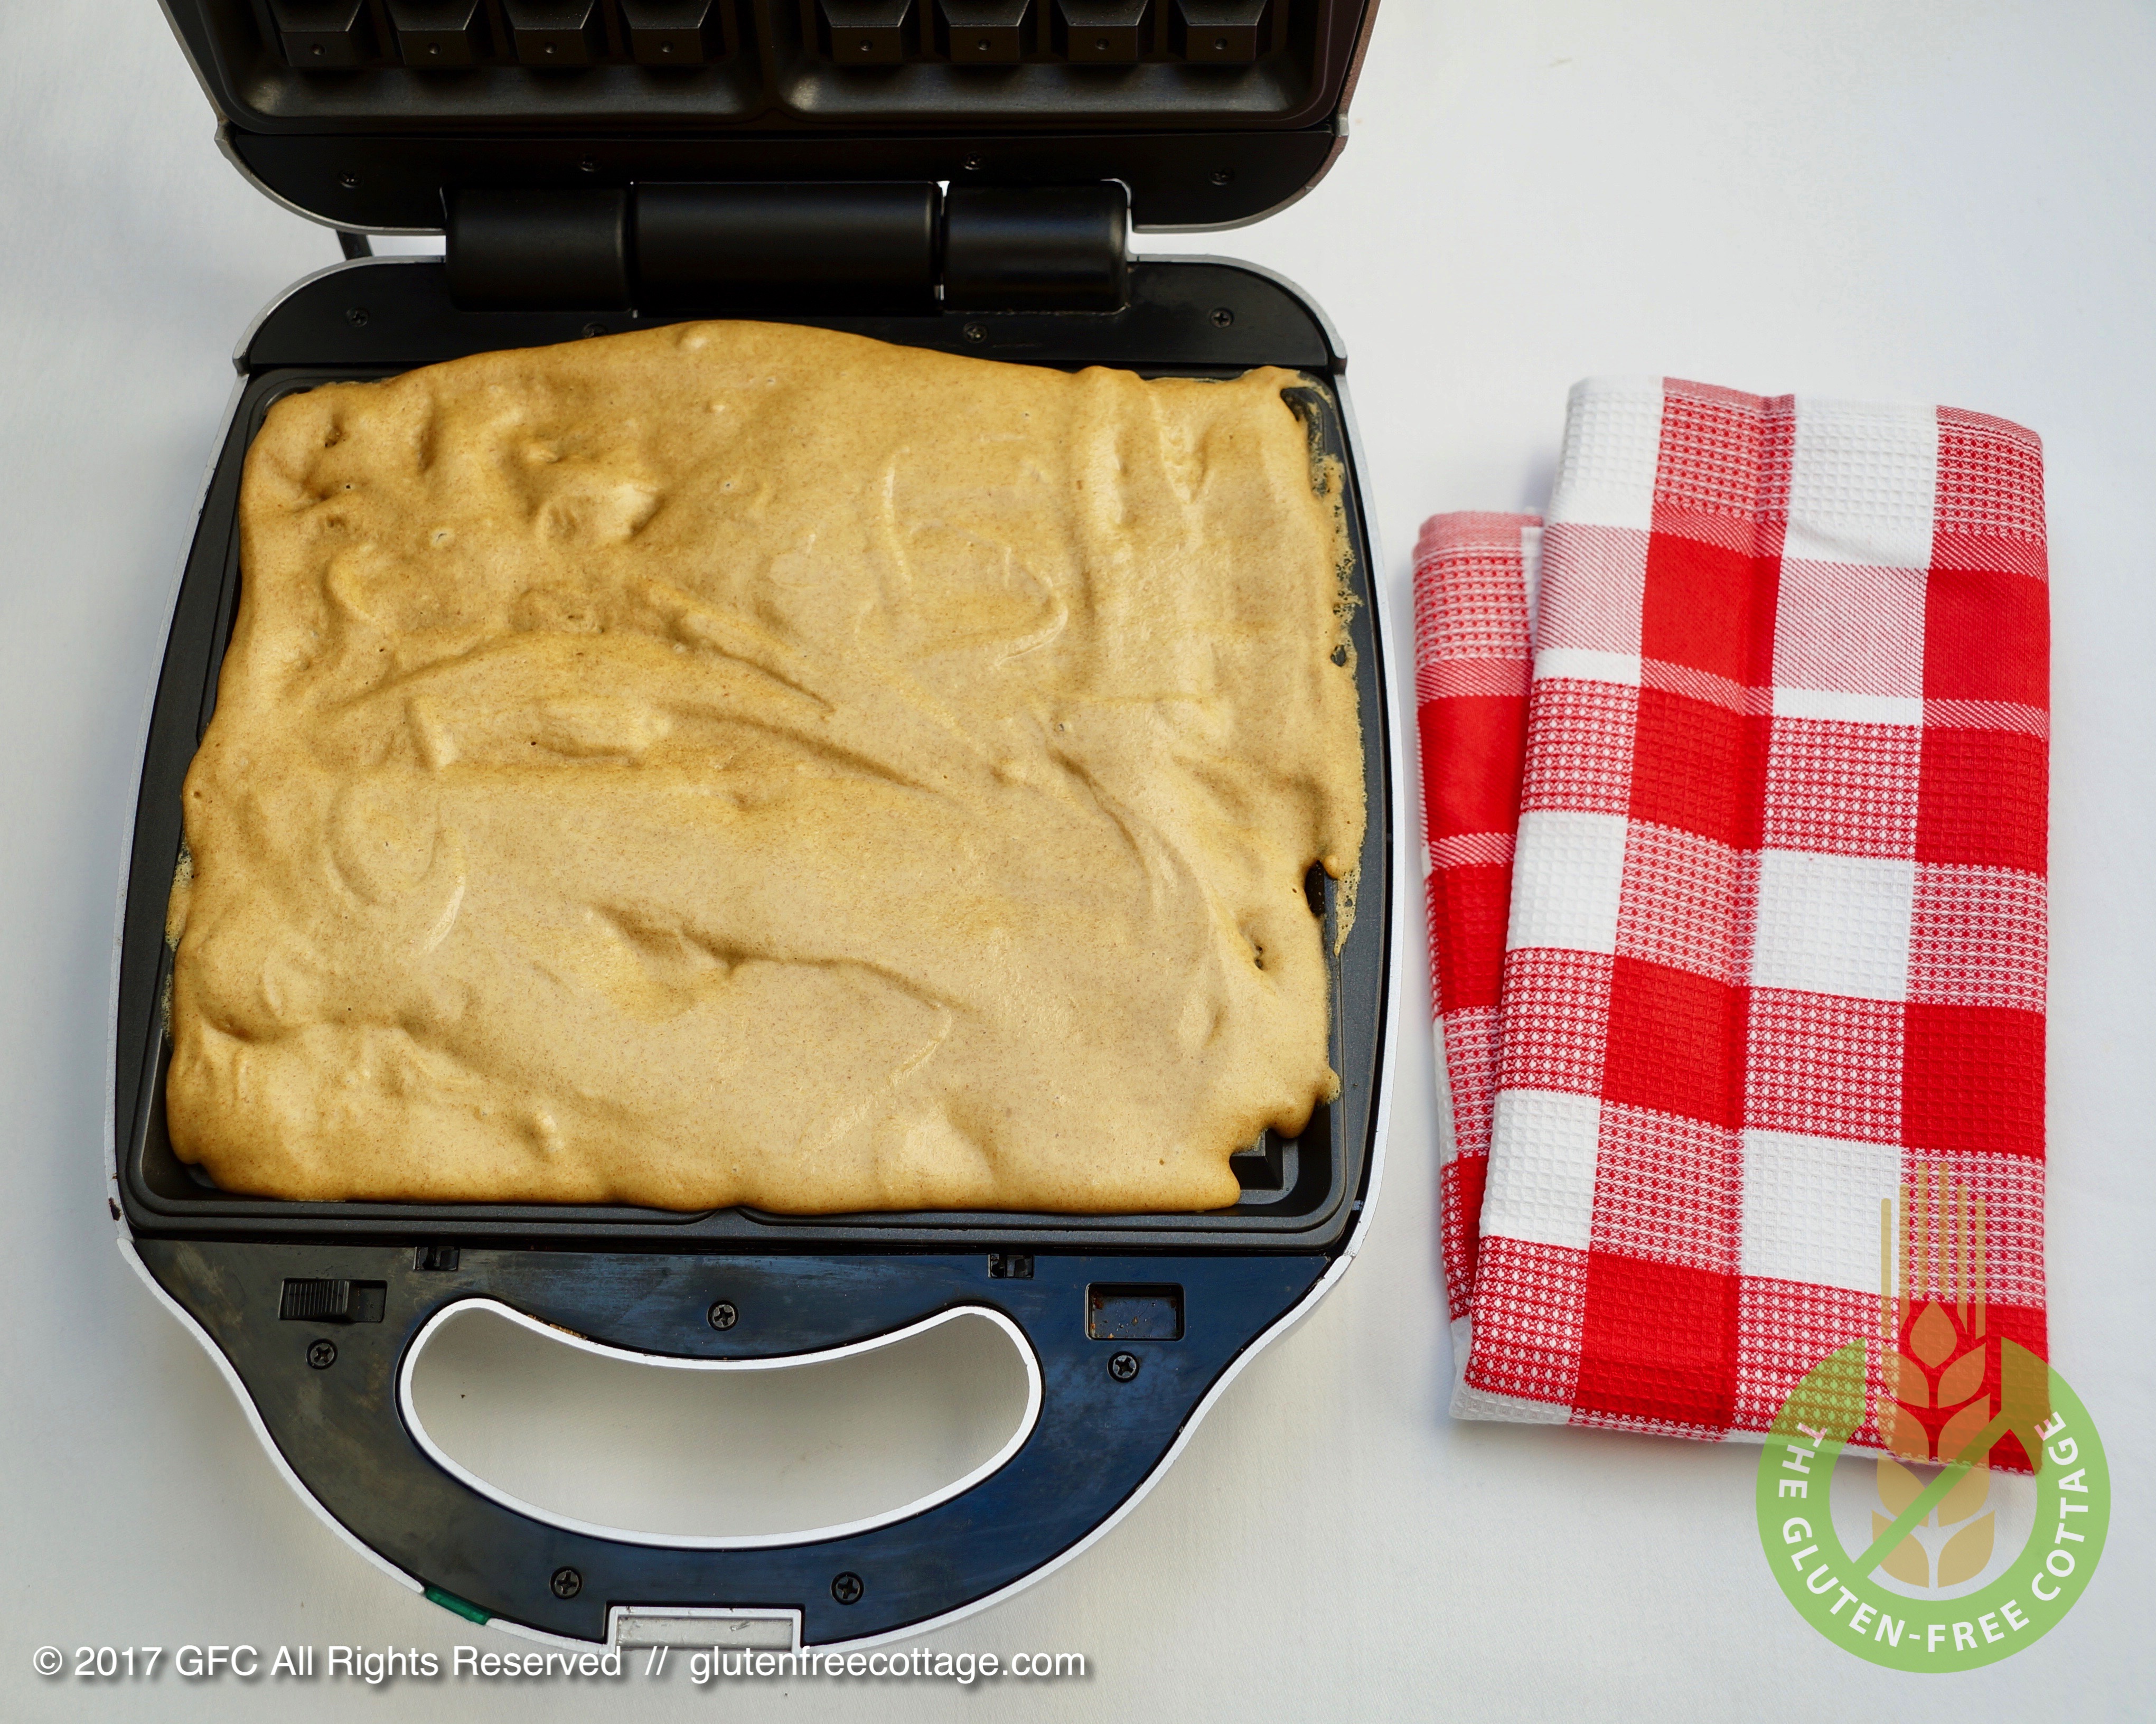 Pour gluten-free batter into waffle maker and let bake (gluten-free waffles).